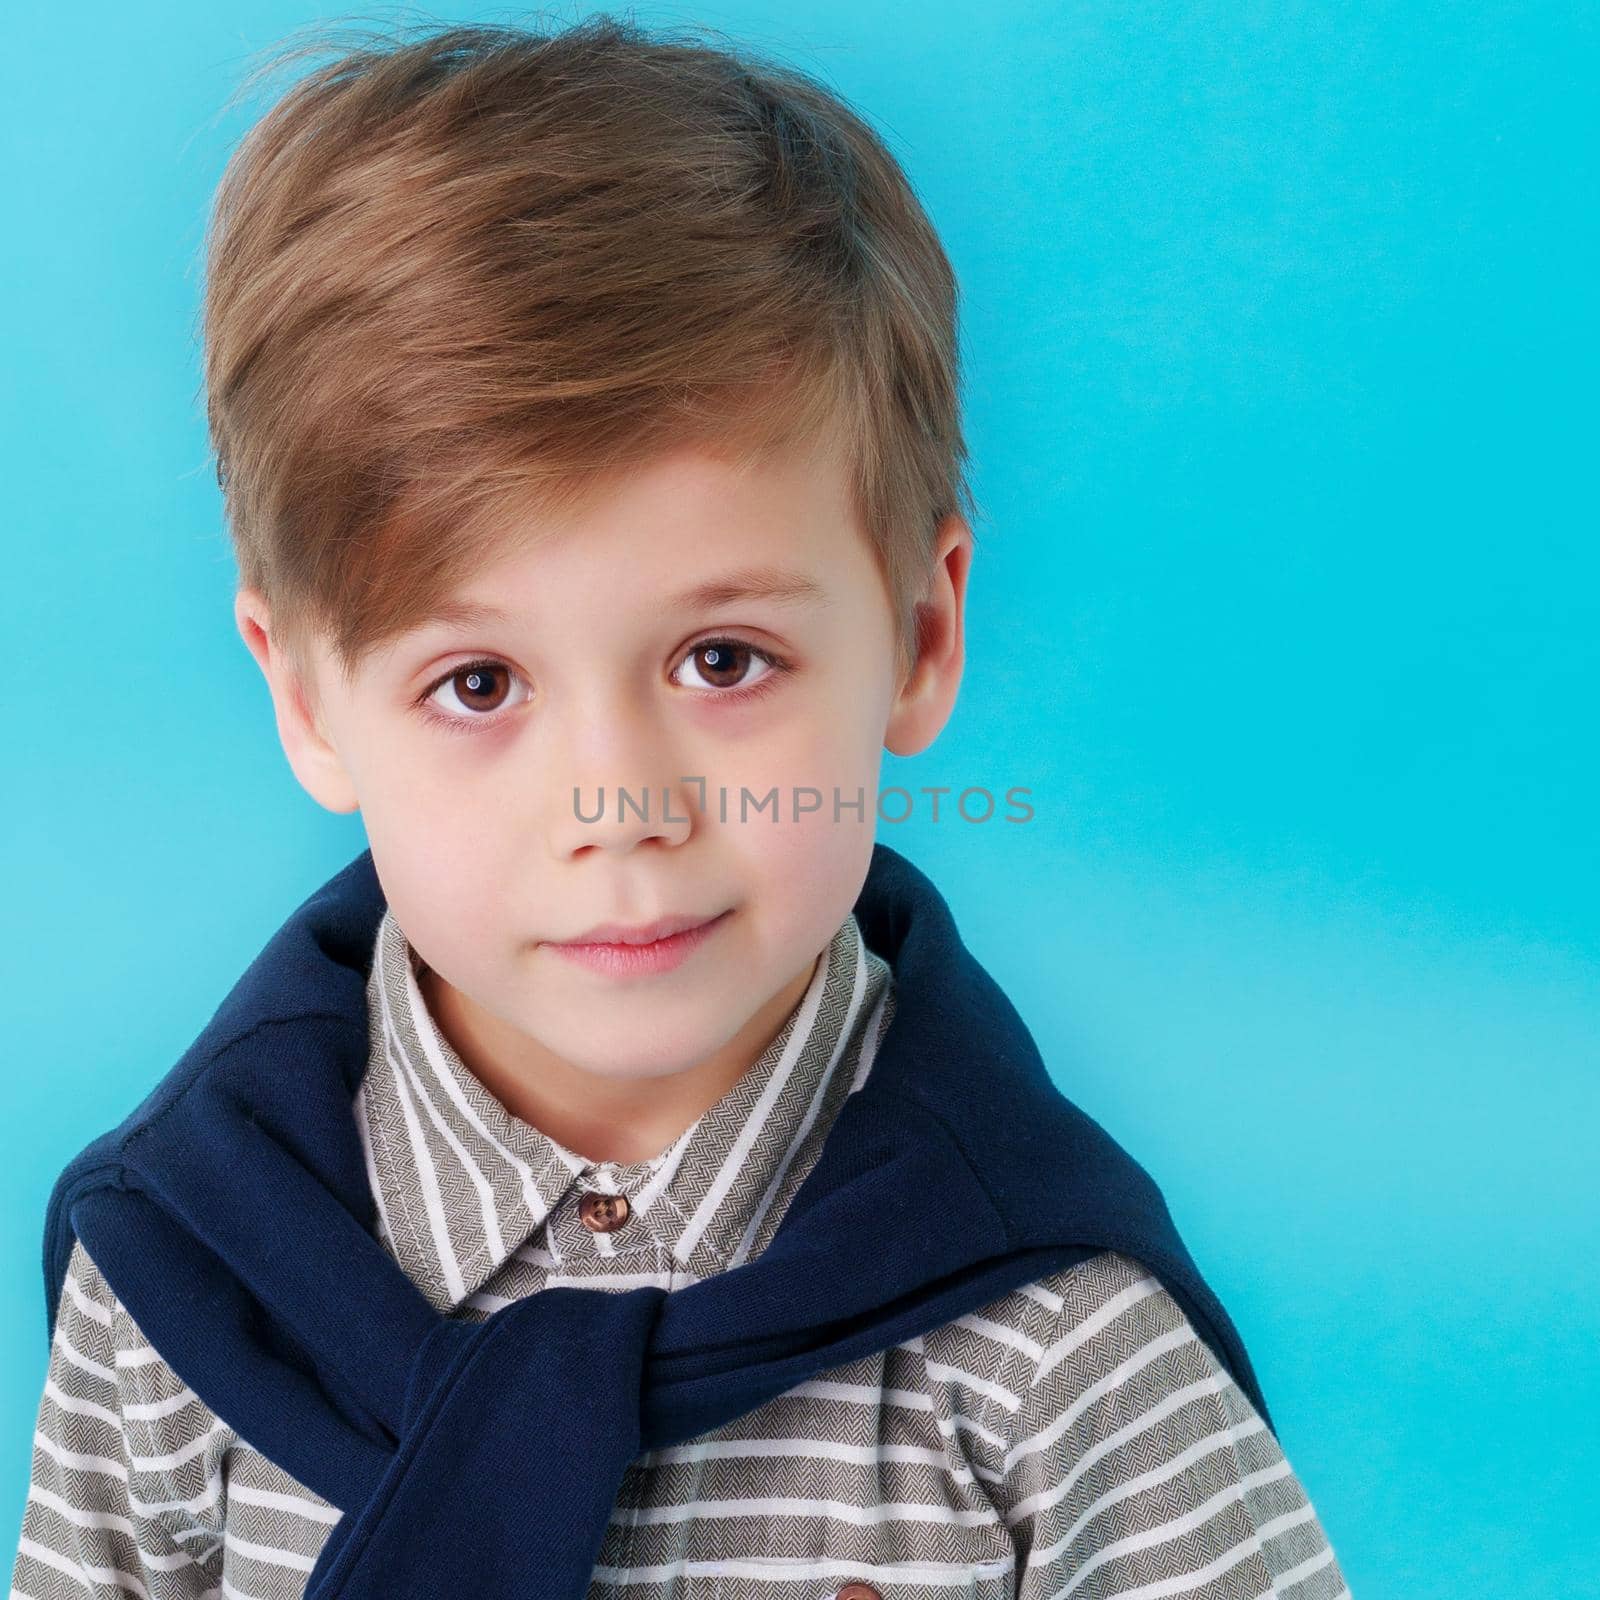 Cute little boy studio portrait close-up. The concept of a happy childhood, advertising goods. Isolated.